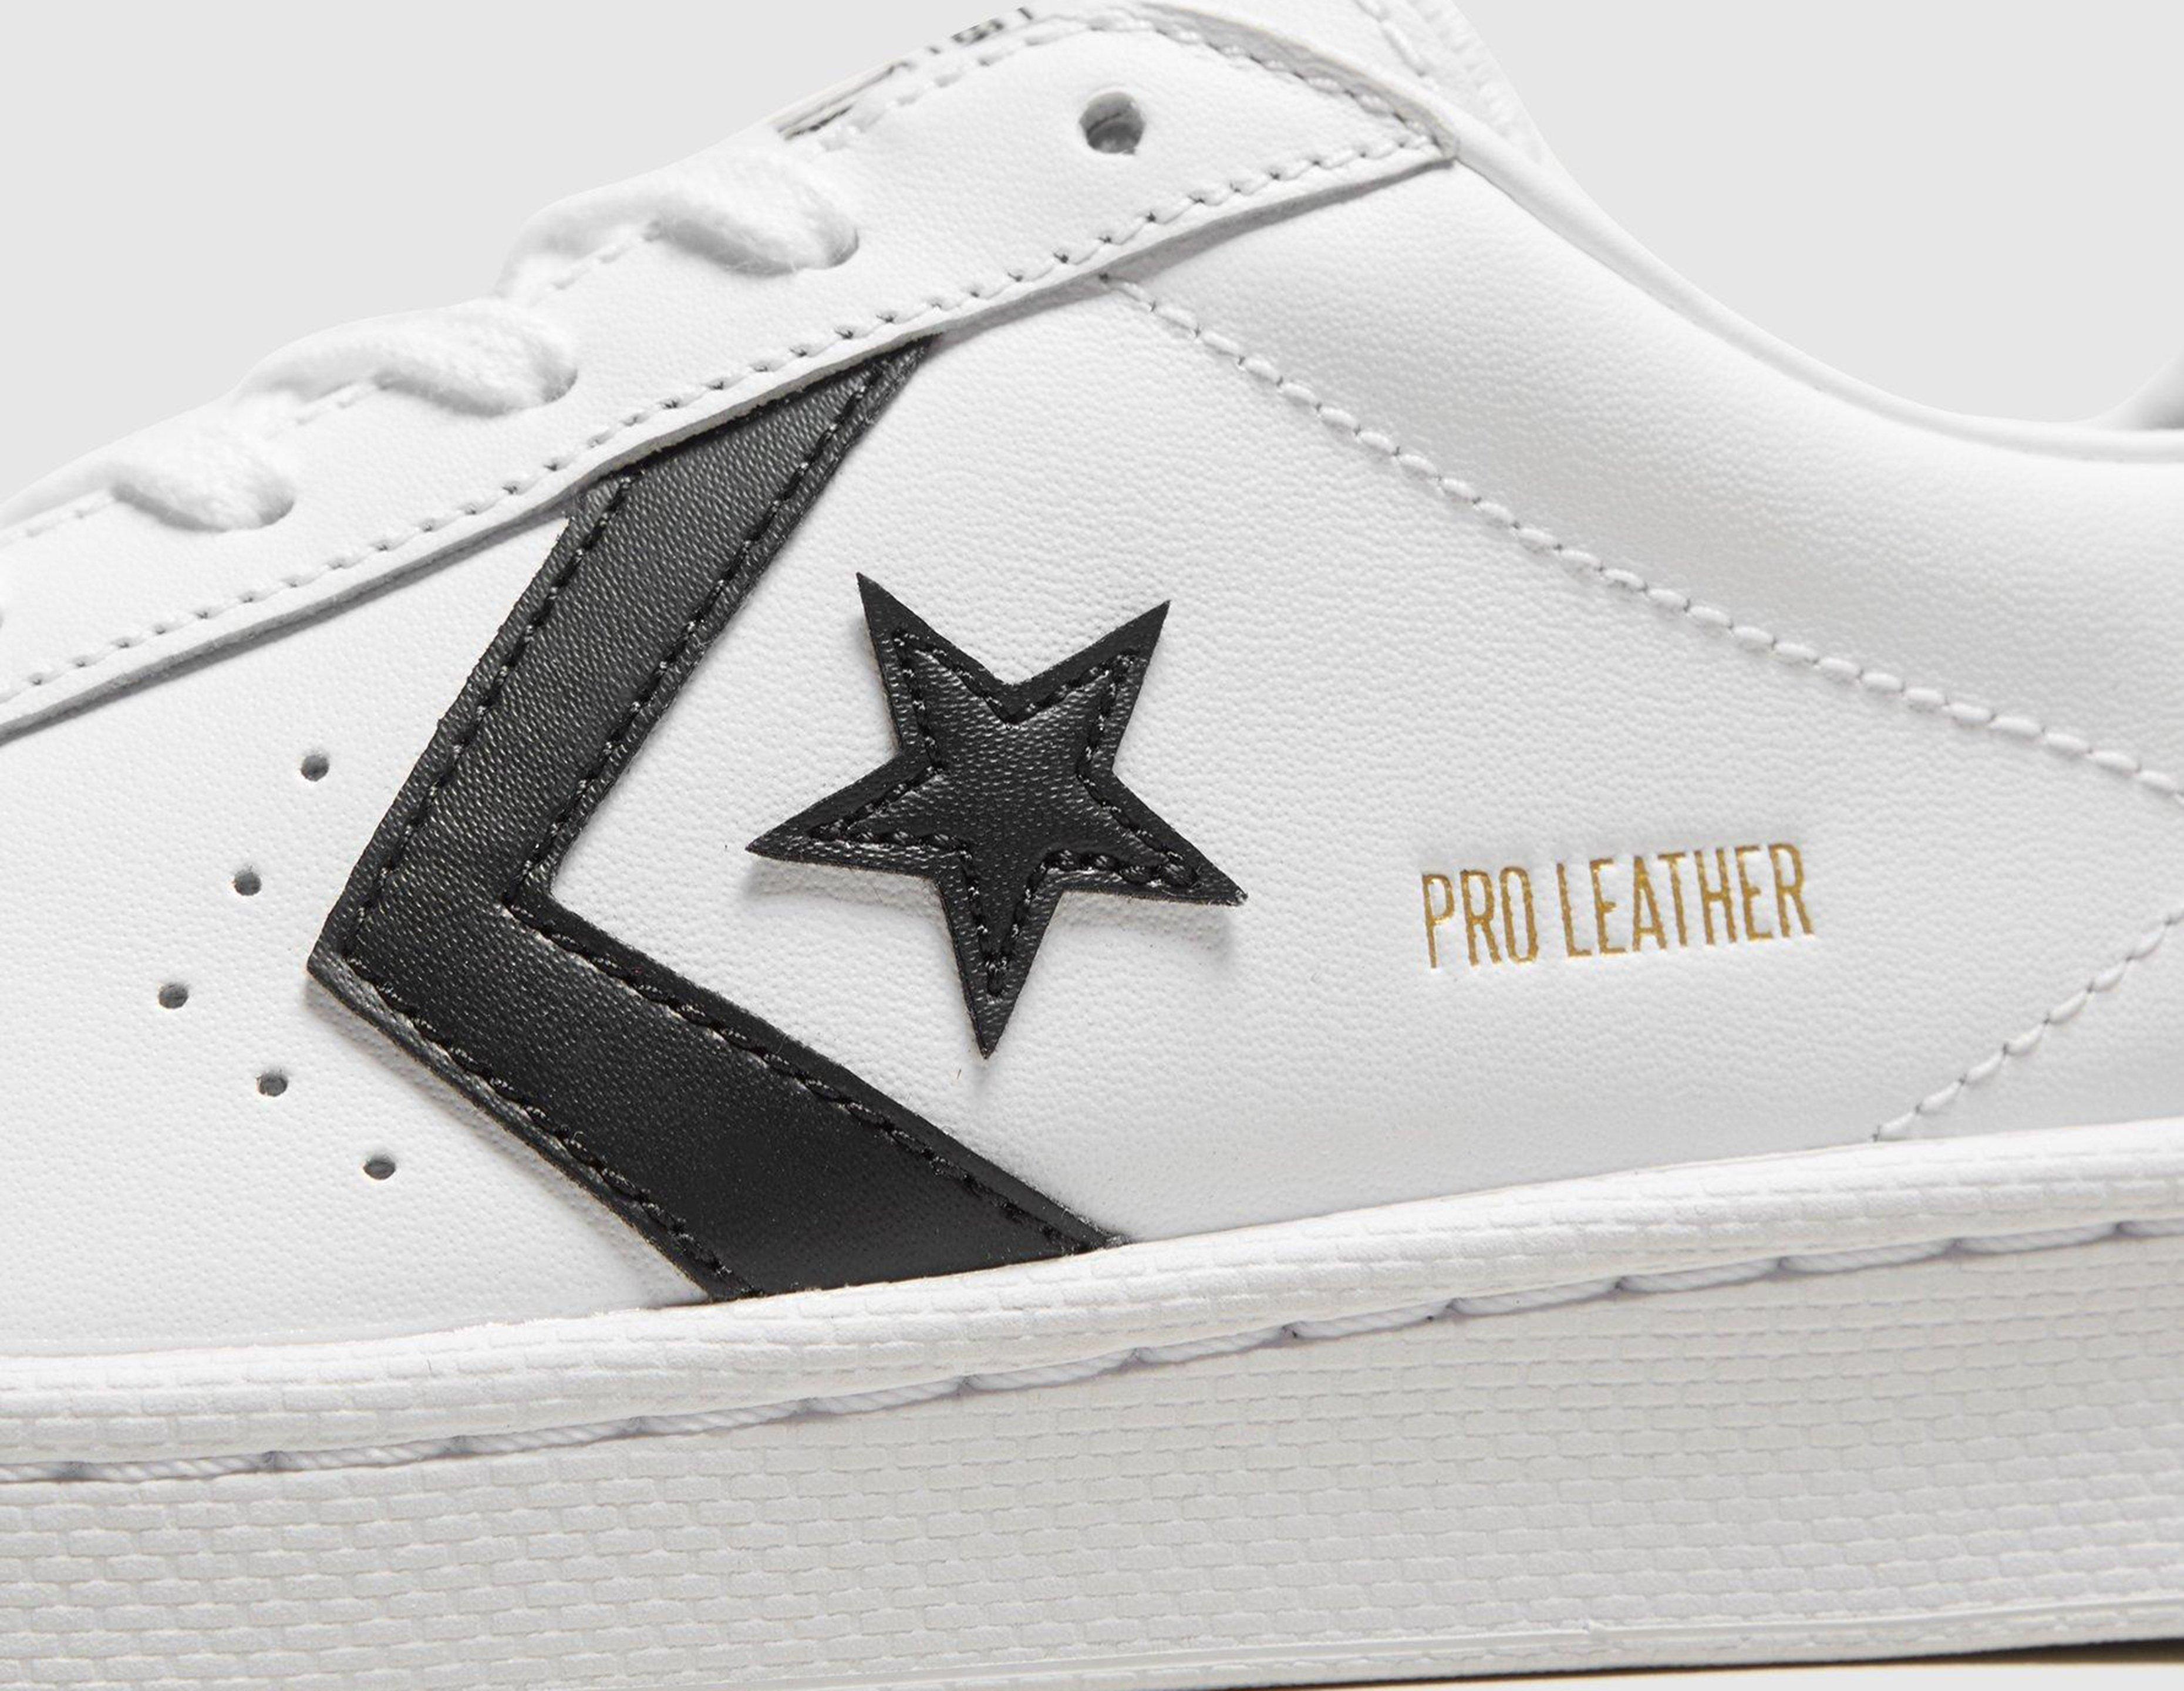 converse pro leather ox